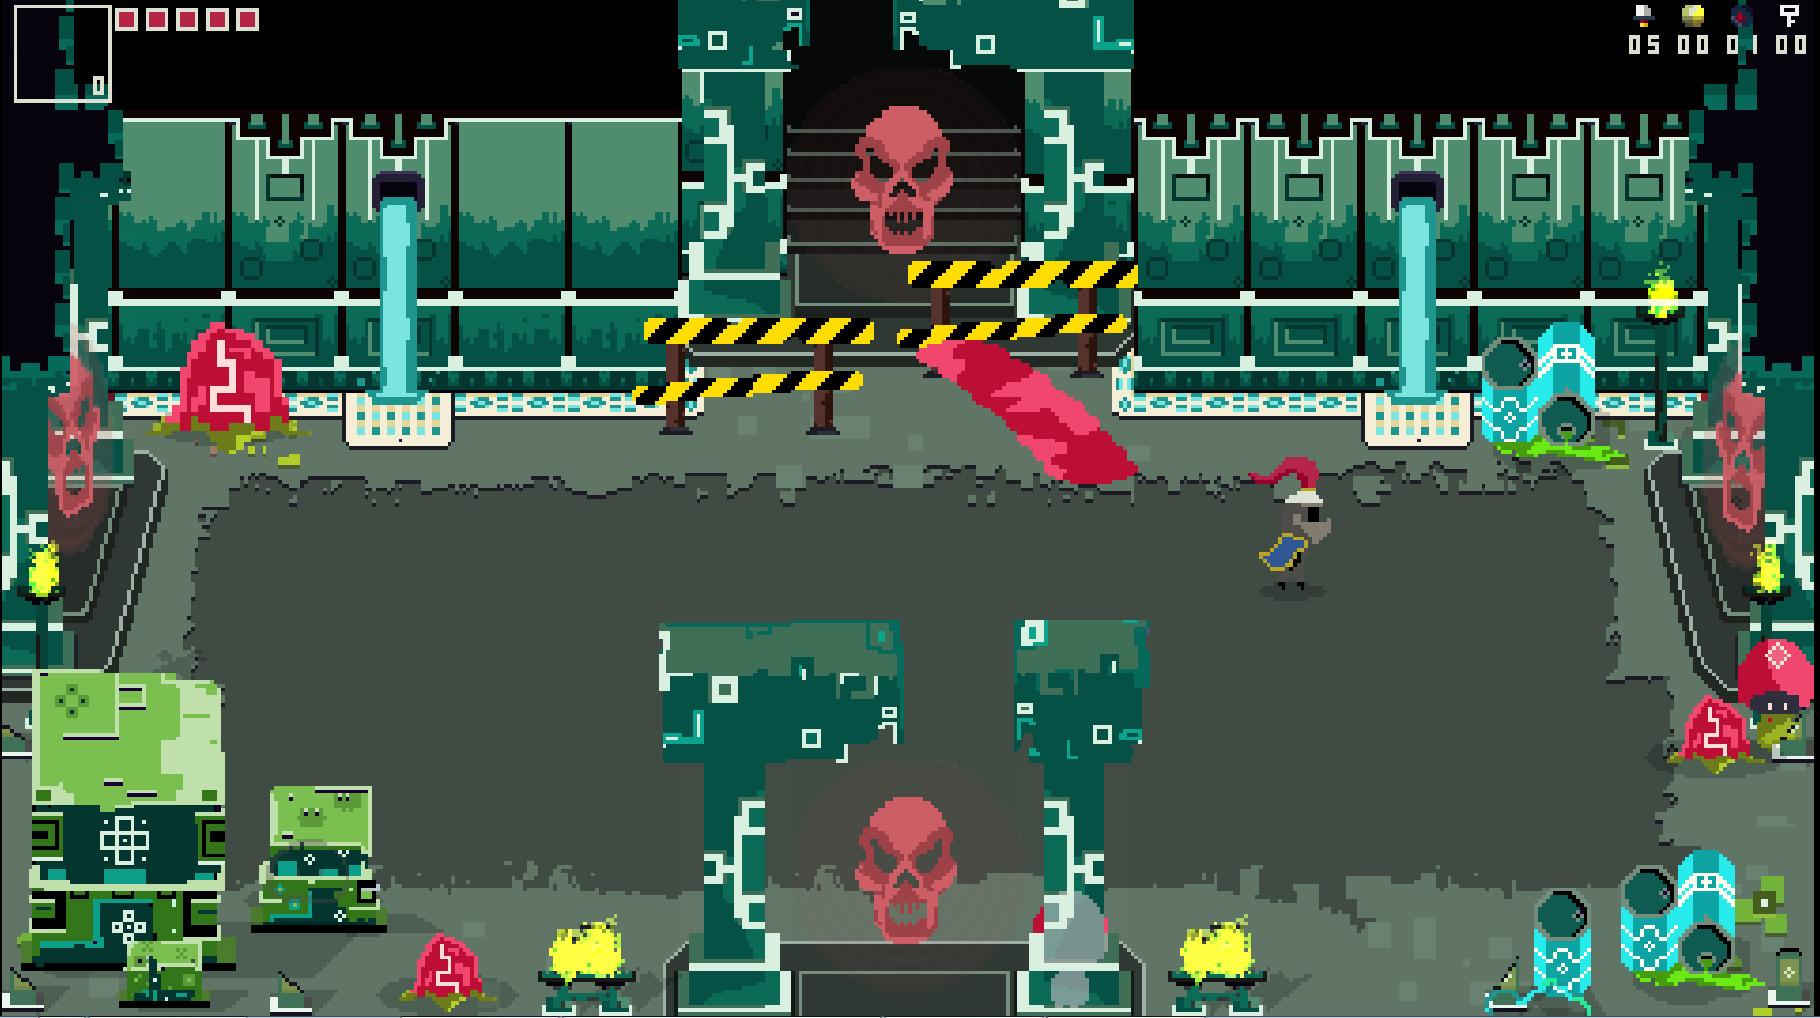 Screenshot №1 from game Silver Knight